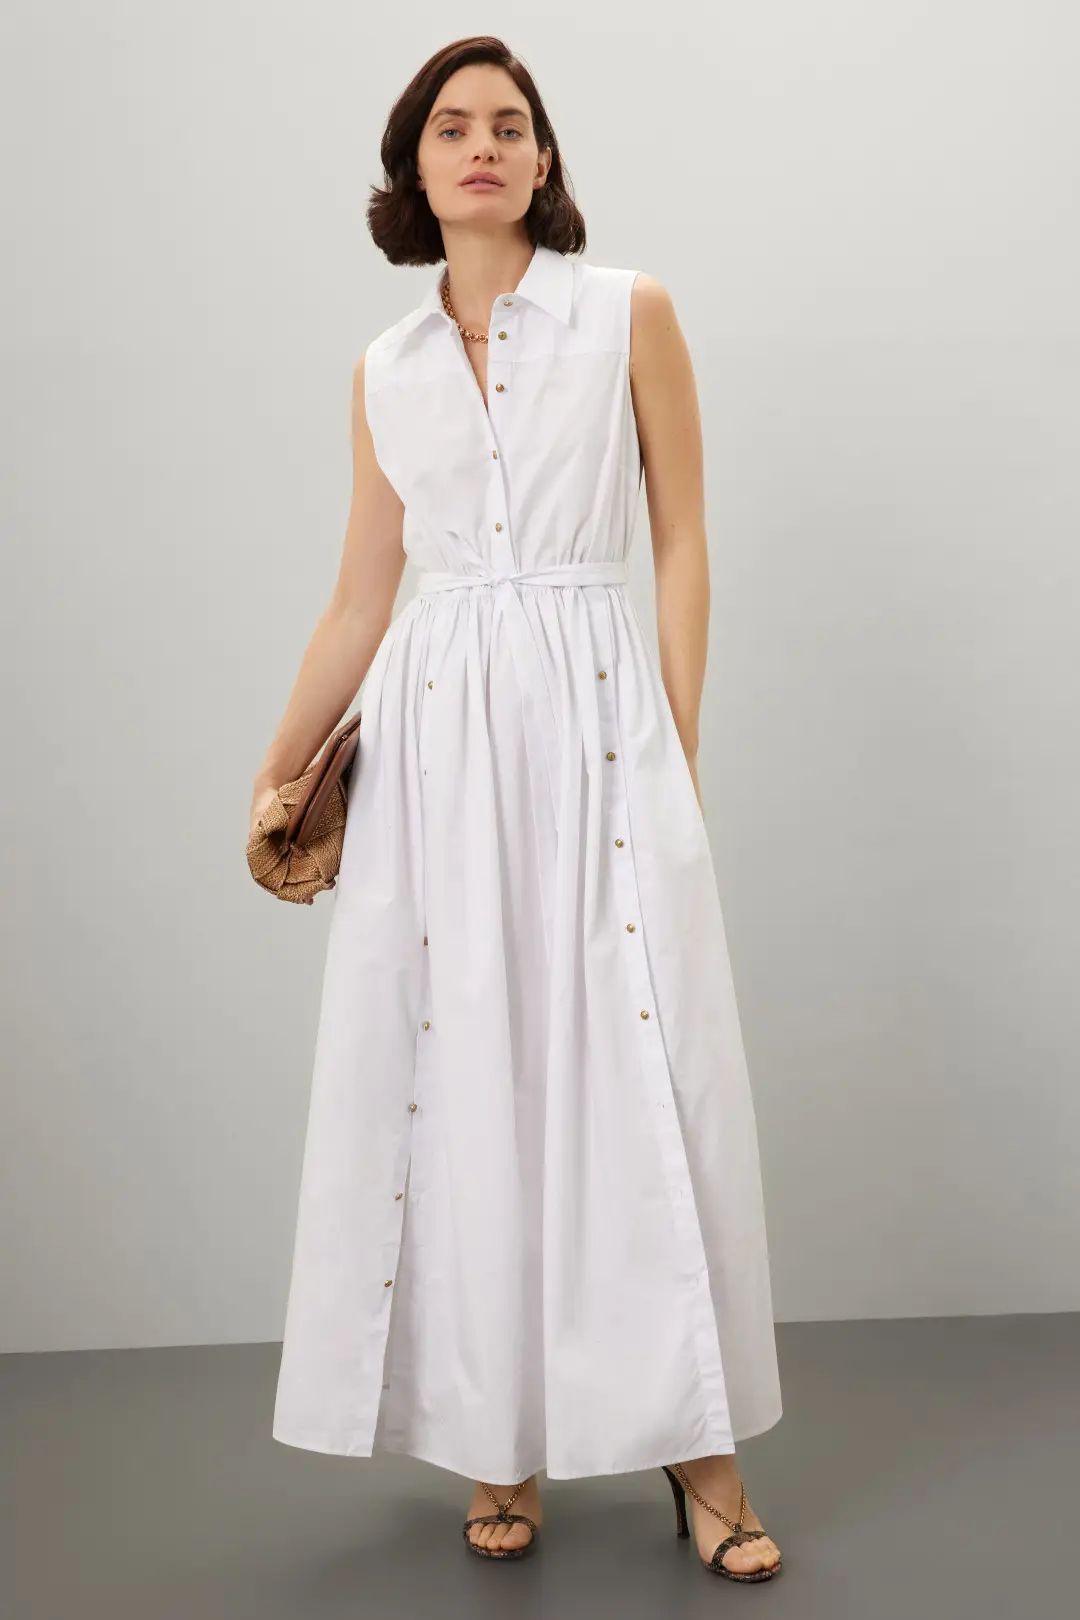 Rosetta Getty Collective White Buttoned Dress | Rent the Runway